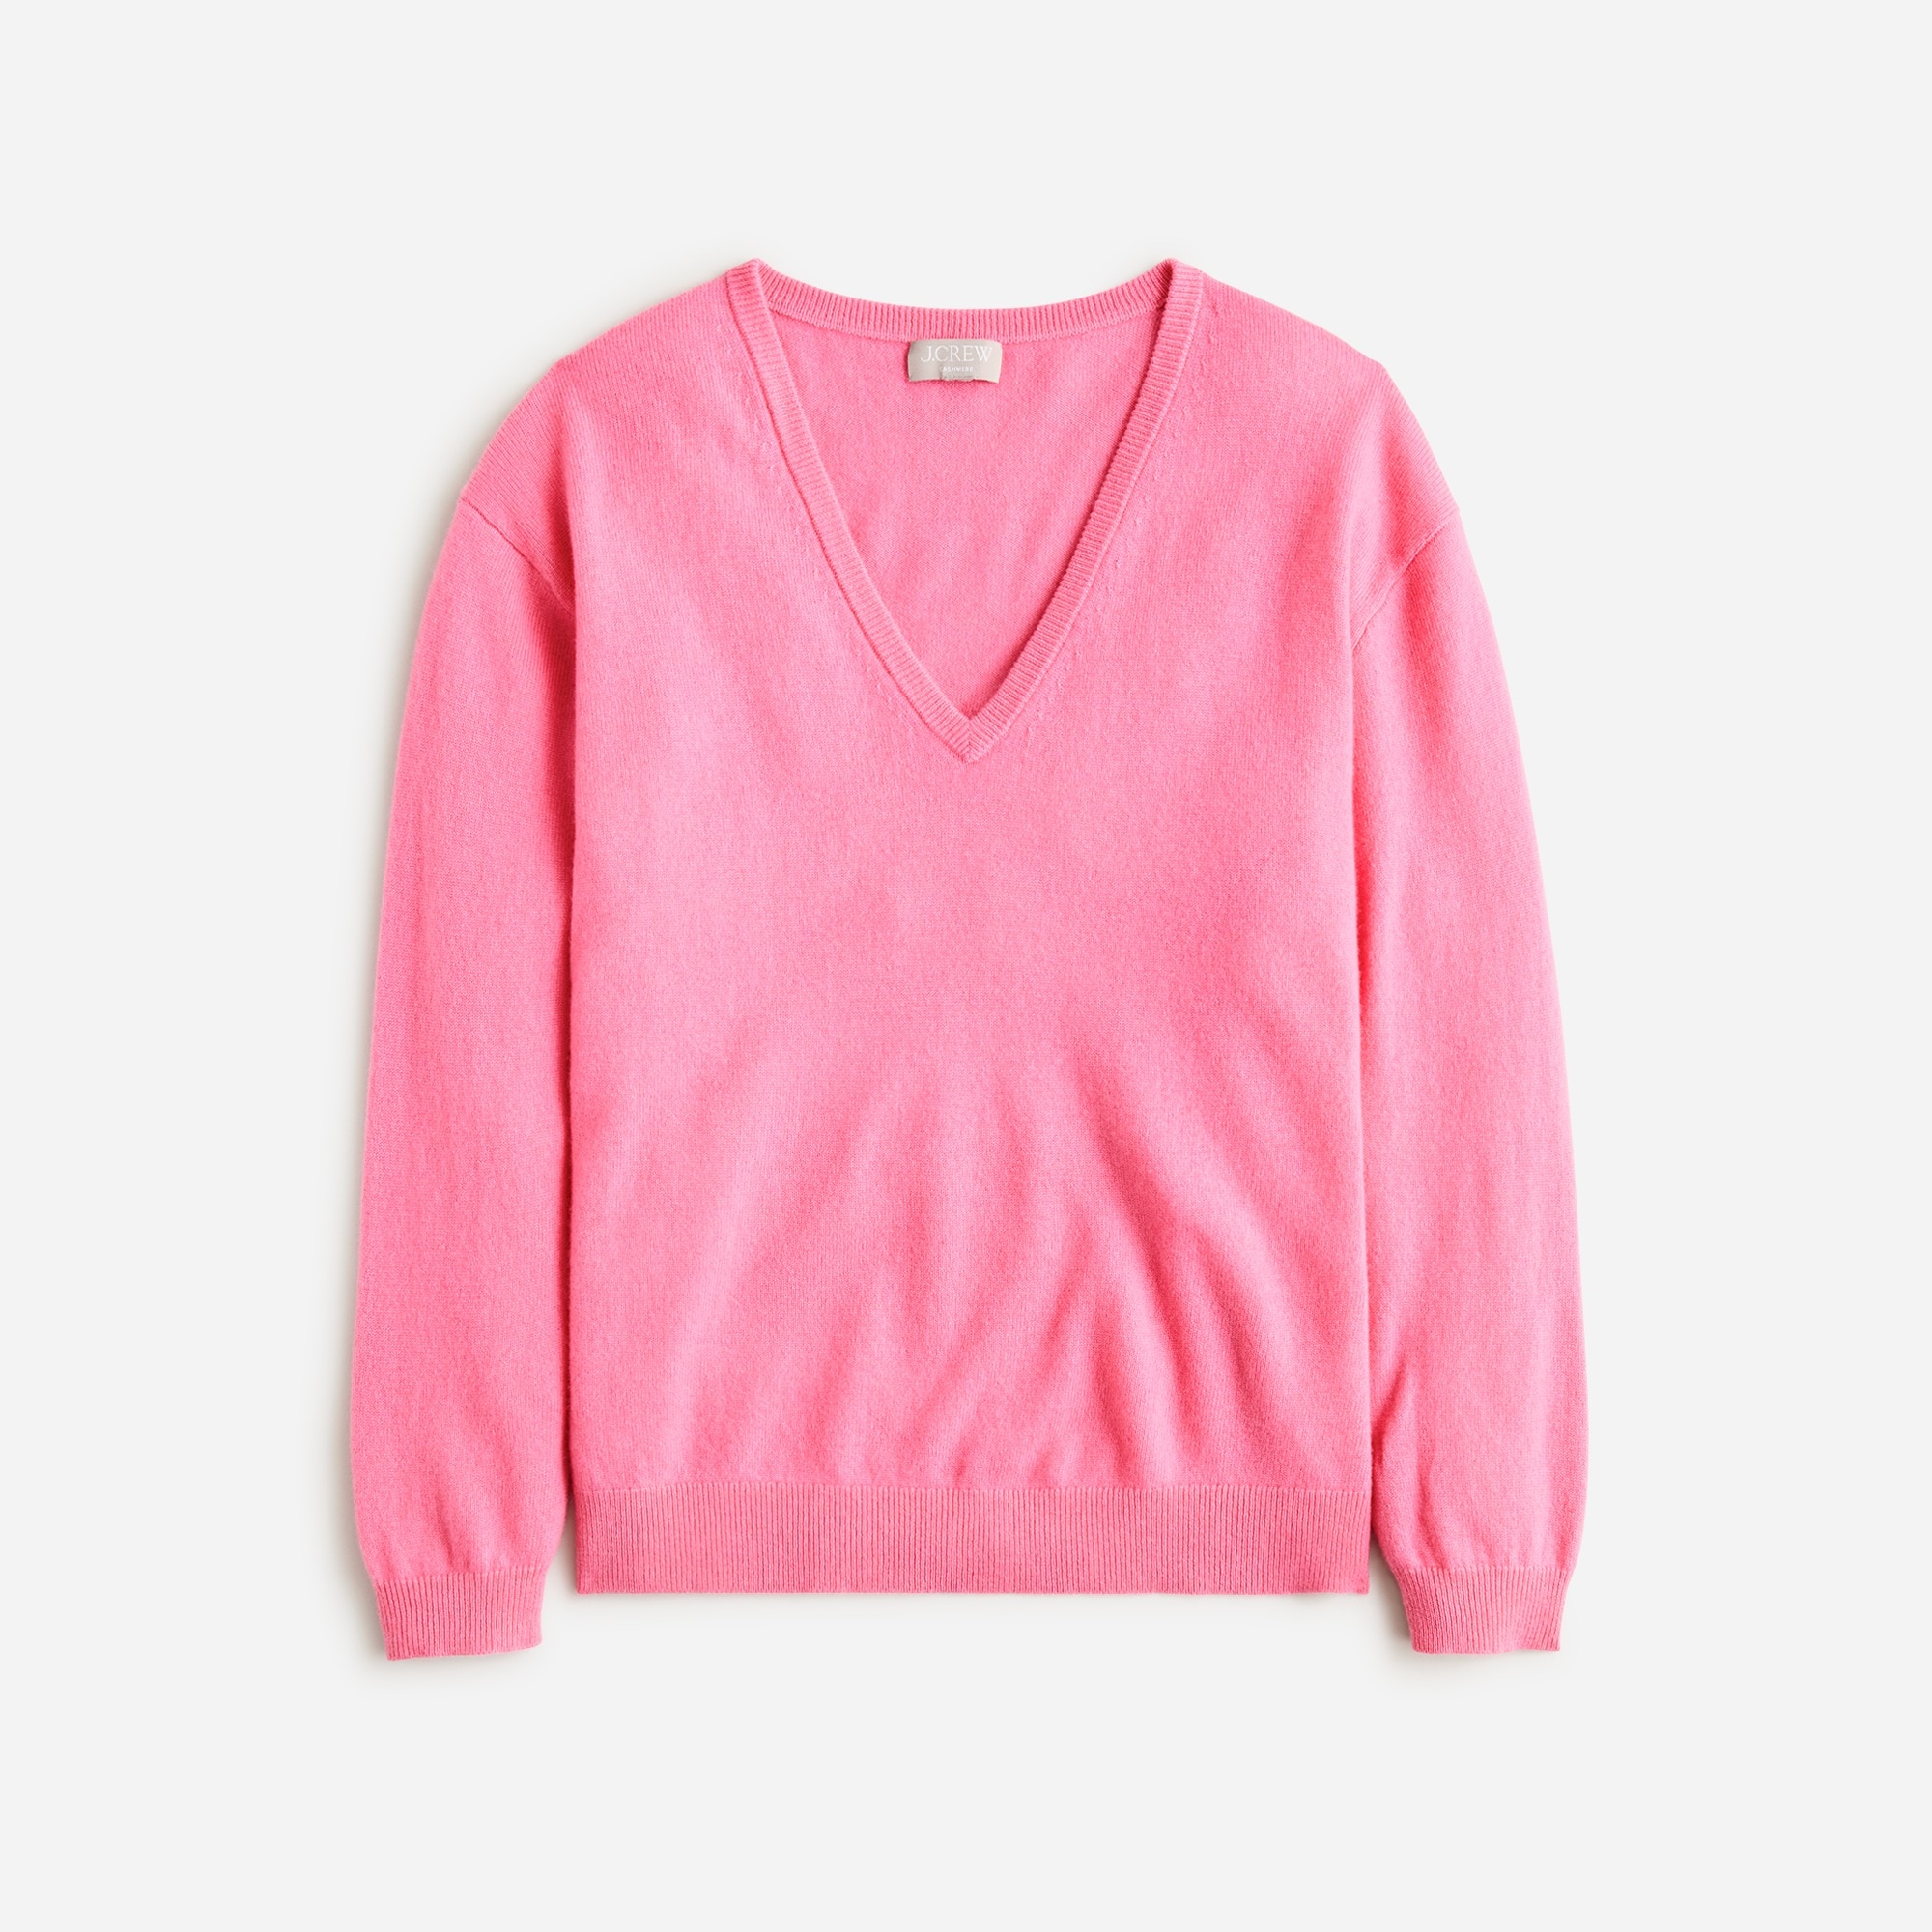  Cashmere relaxed V-neck sweater